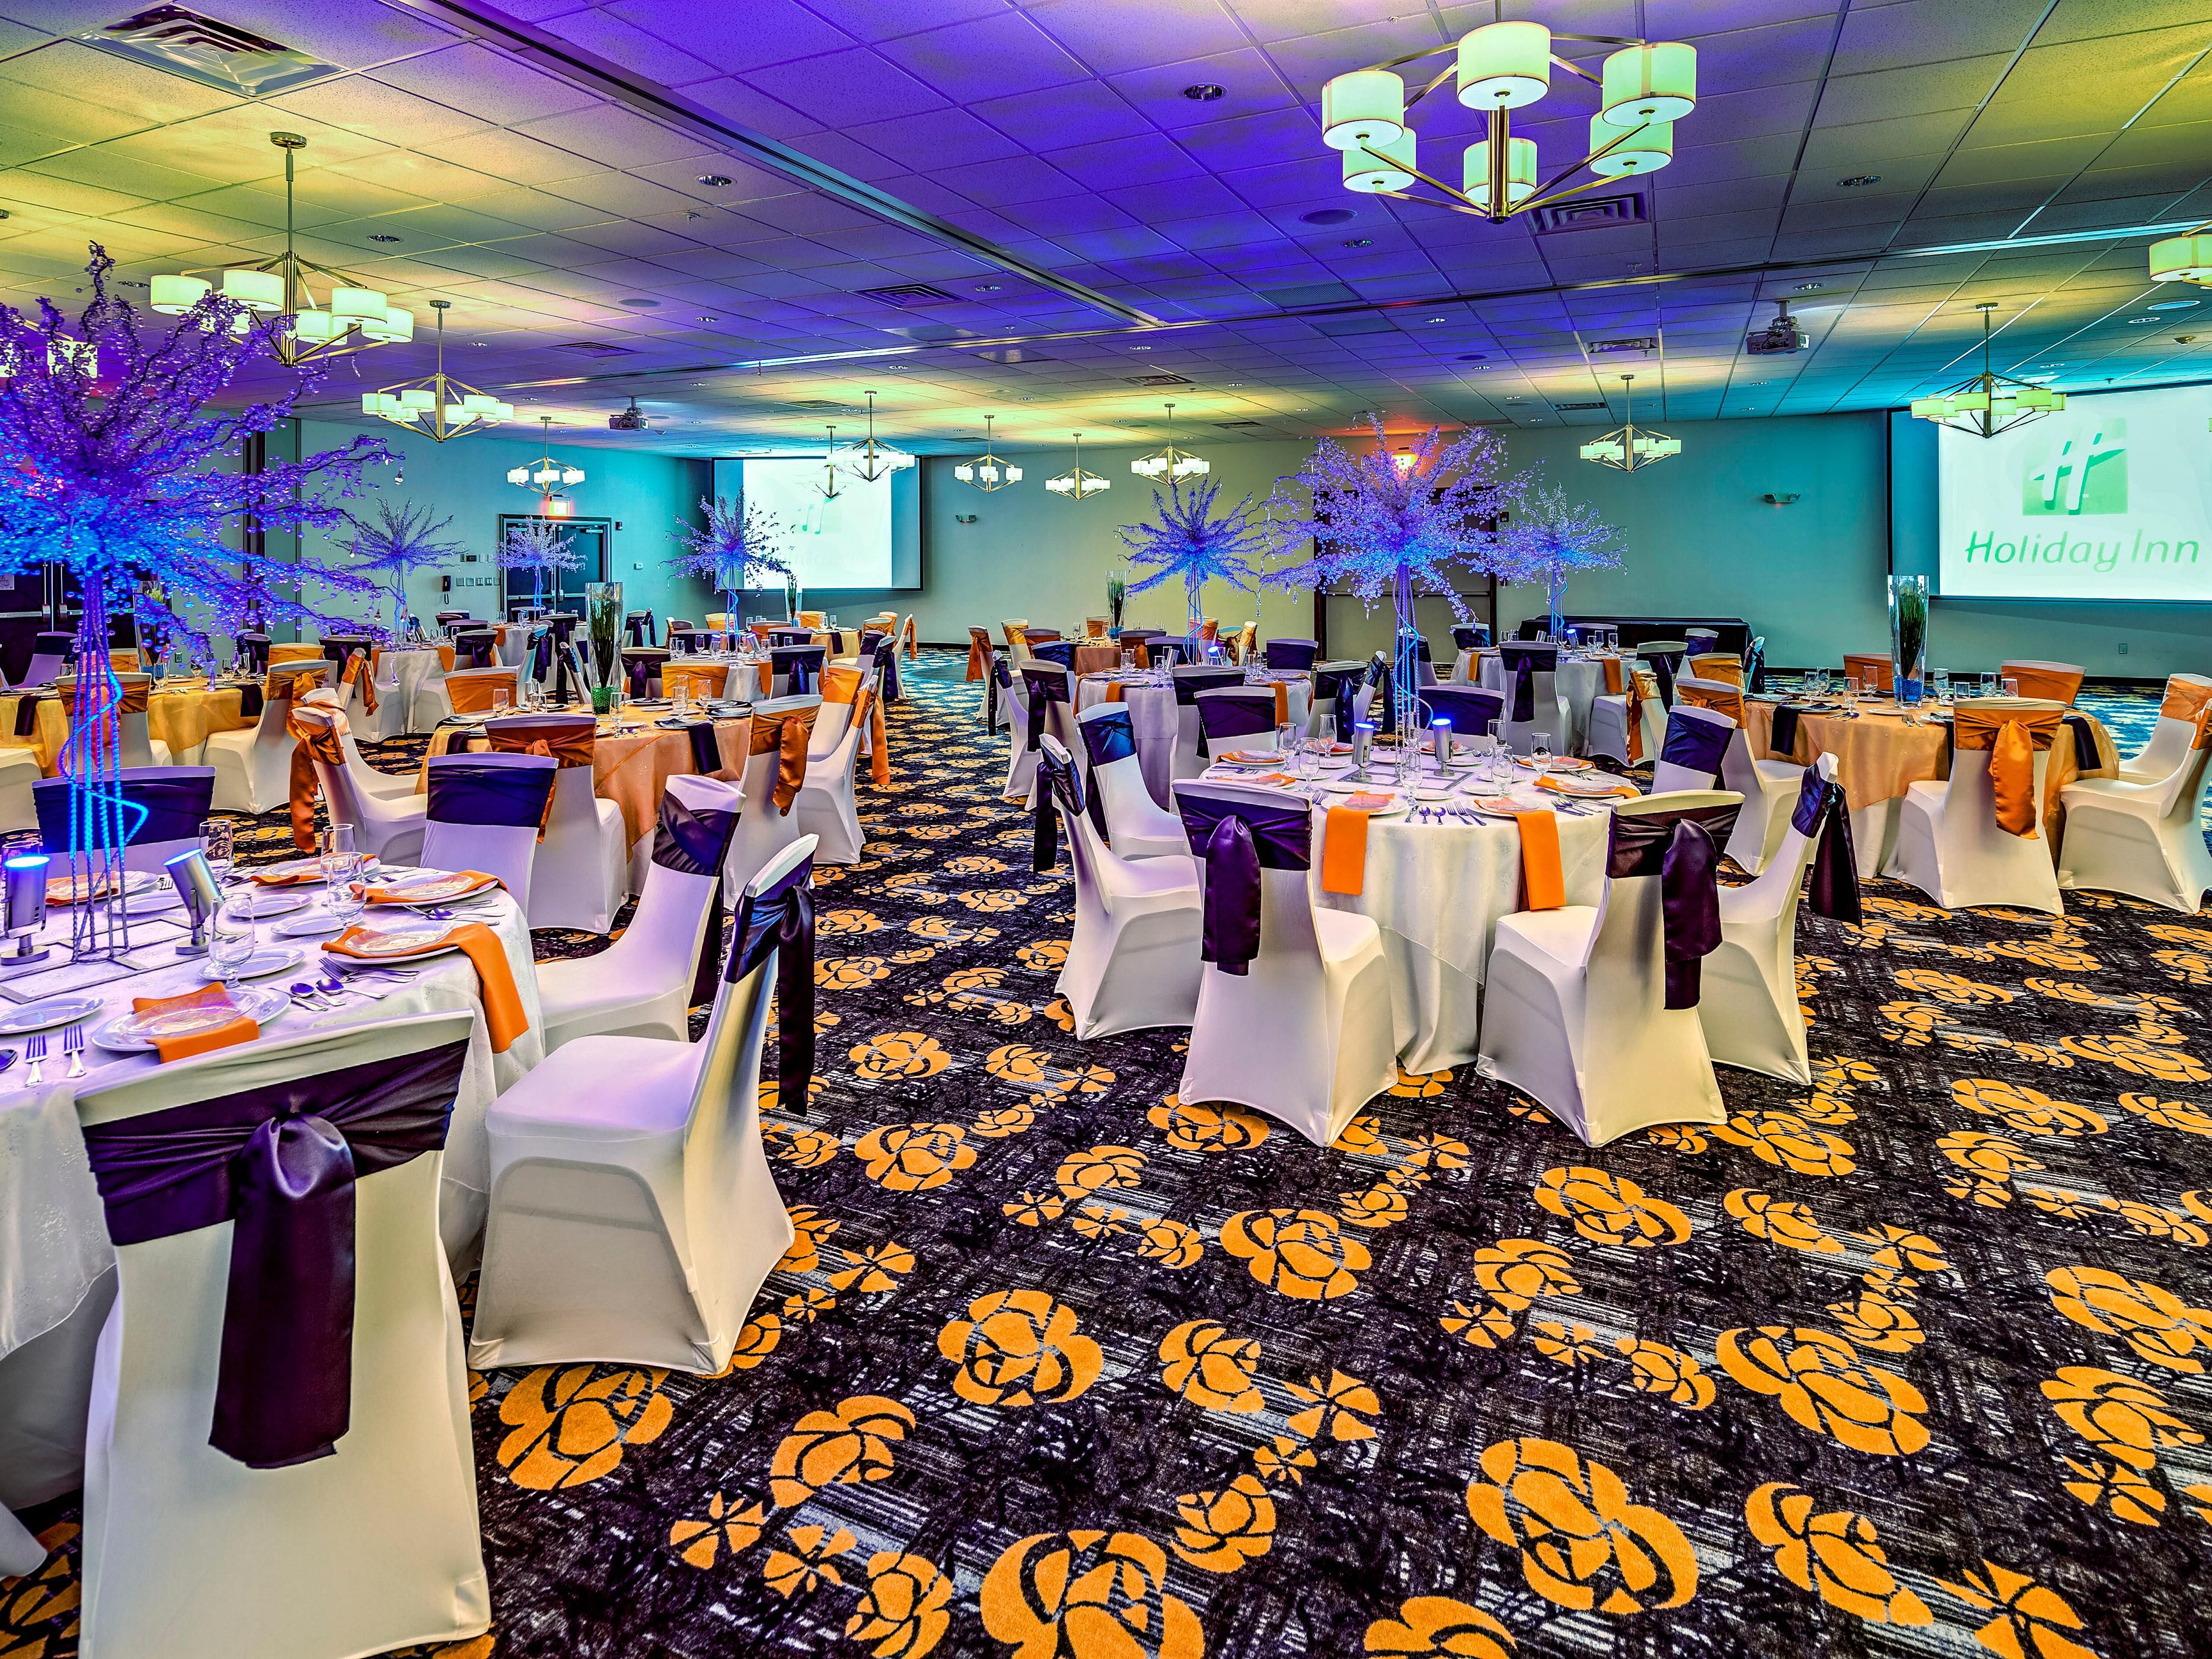 With over 10,000 sq. ft. of flexible meeting space, we are capable of hosting events from three to 300 guests. We are here to assist you every step of the way to expertly plan and execute your corporate meetings, social event, or wedding. 